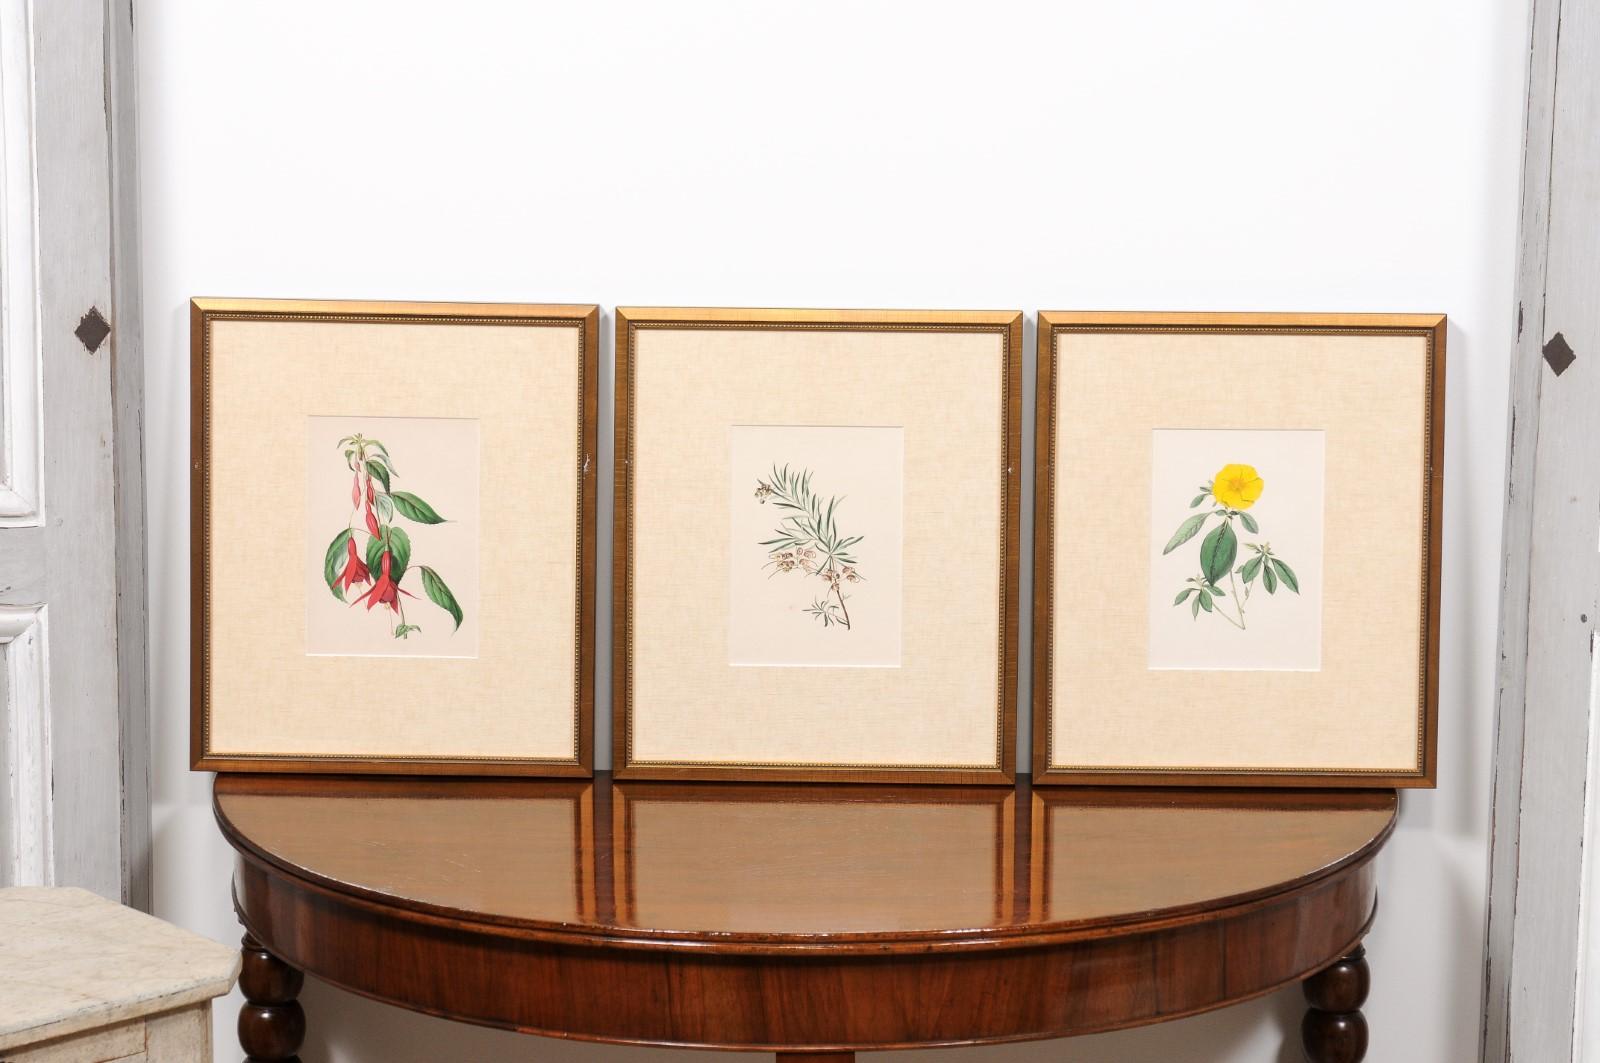  Victorian Floral Prints from The Museum of Flowers by Mary Elizabeth Rosenberg For Sale 6